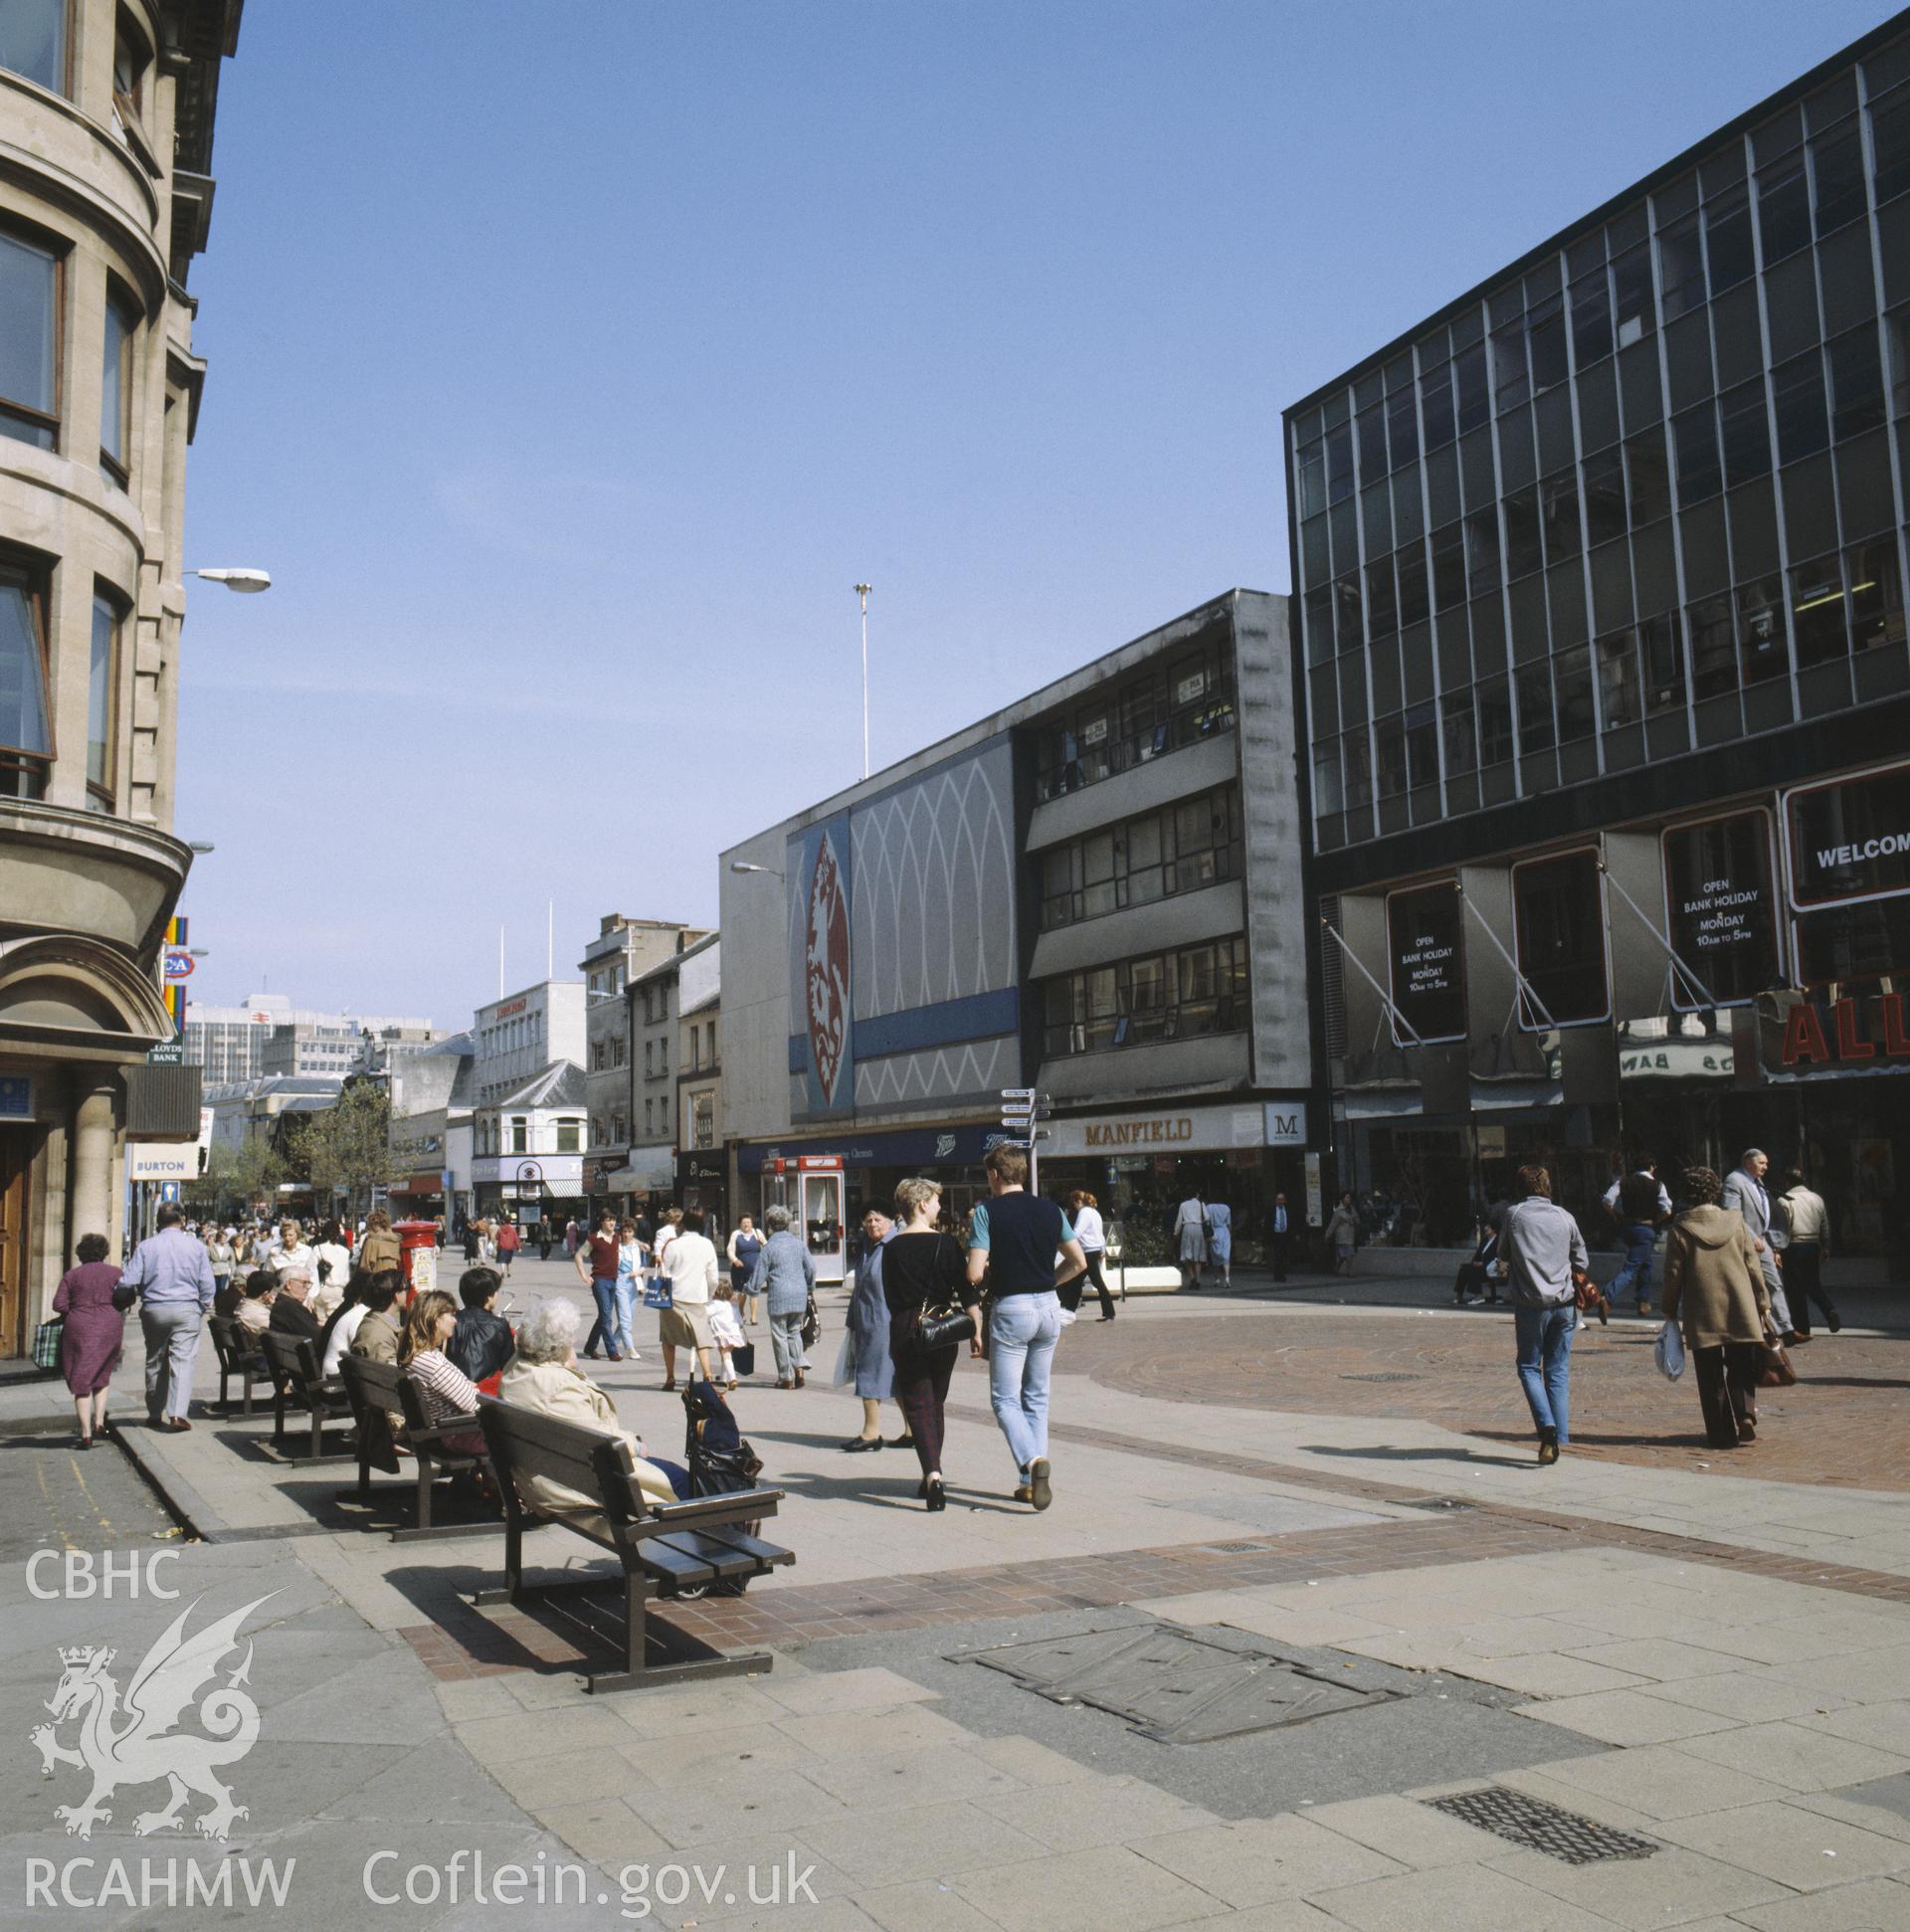 1 colour transparency showing street scene in central Cardiff with shoppers; collated by the former Central Office of Information.